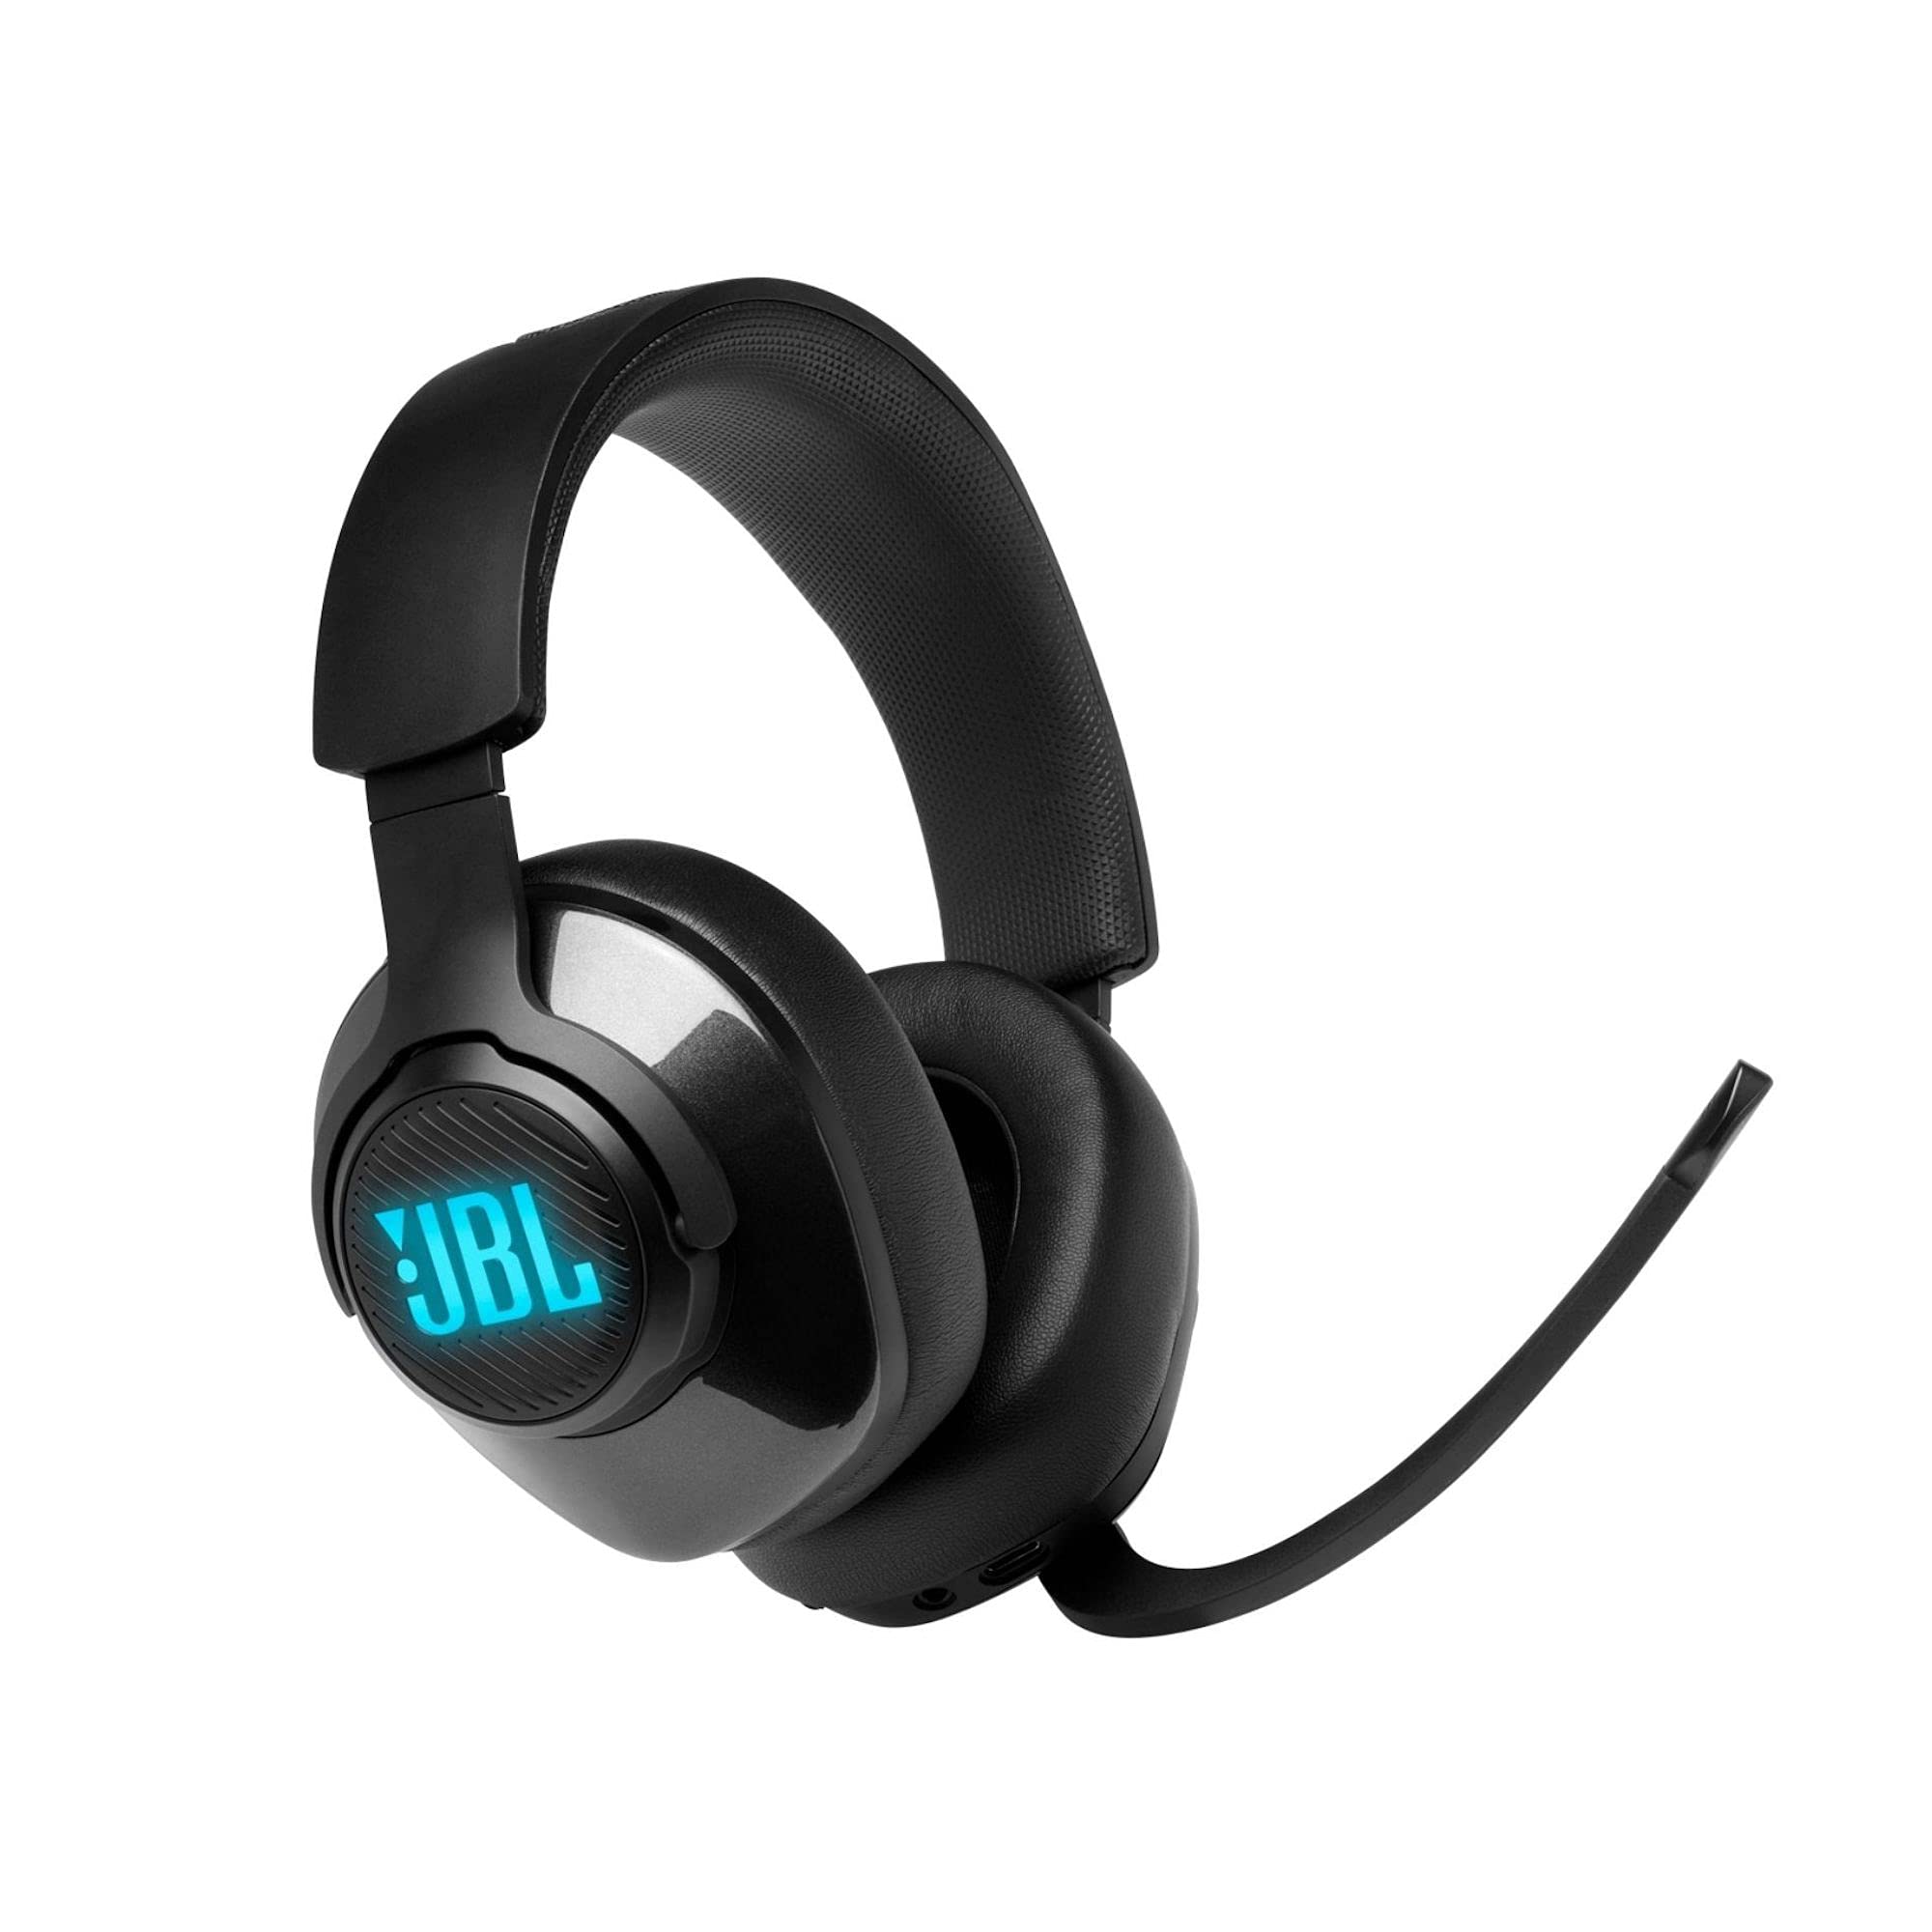 JBL Quantum Stream: Dual Pattern Premium USB Microphone for Streaming, Recording and Gaming & Quantum 400 - Wired Over-Ear Gaming Headphones with USB and Game-Chat Balance Dial - Black